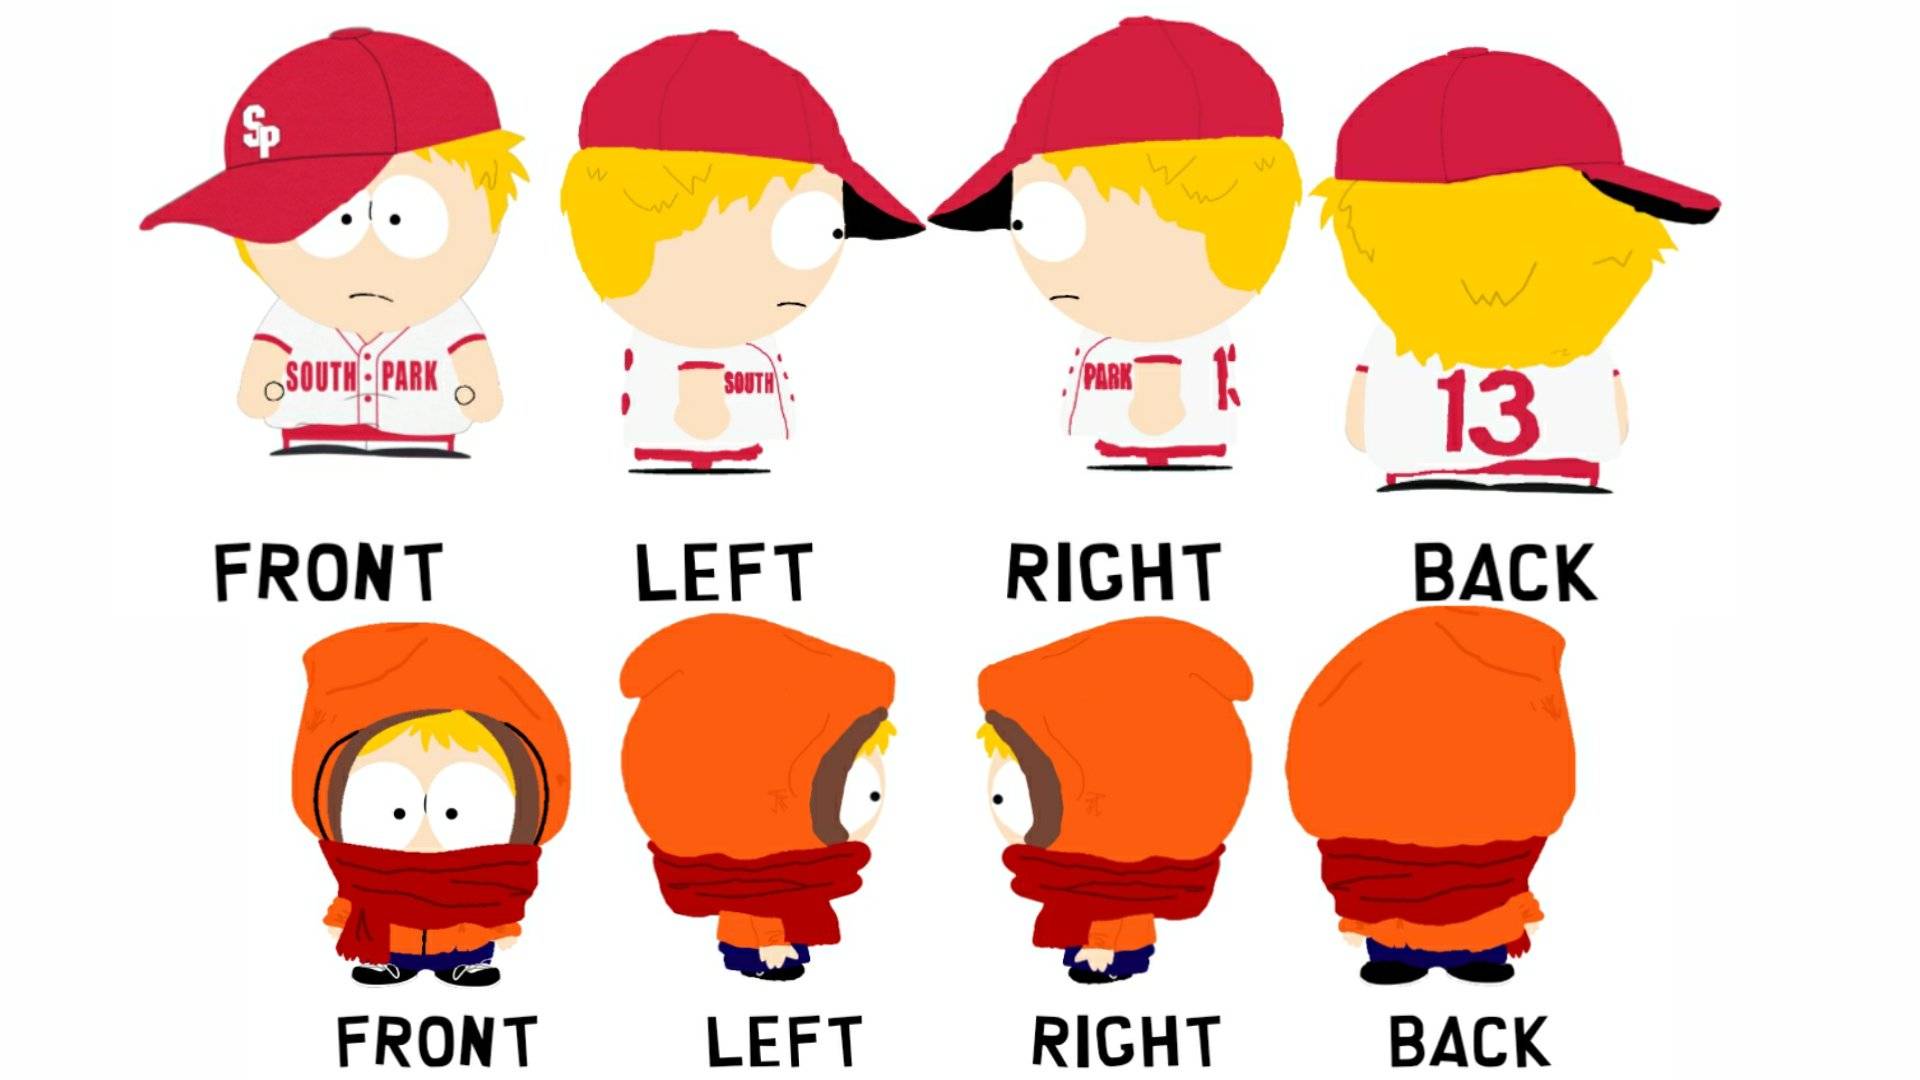 South Park Reference Sheet 